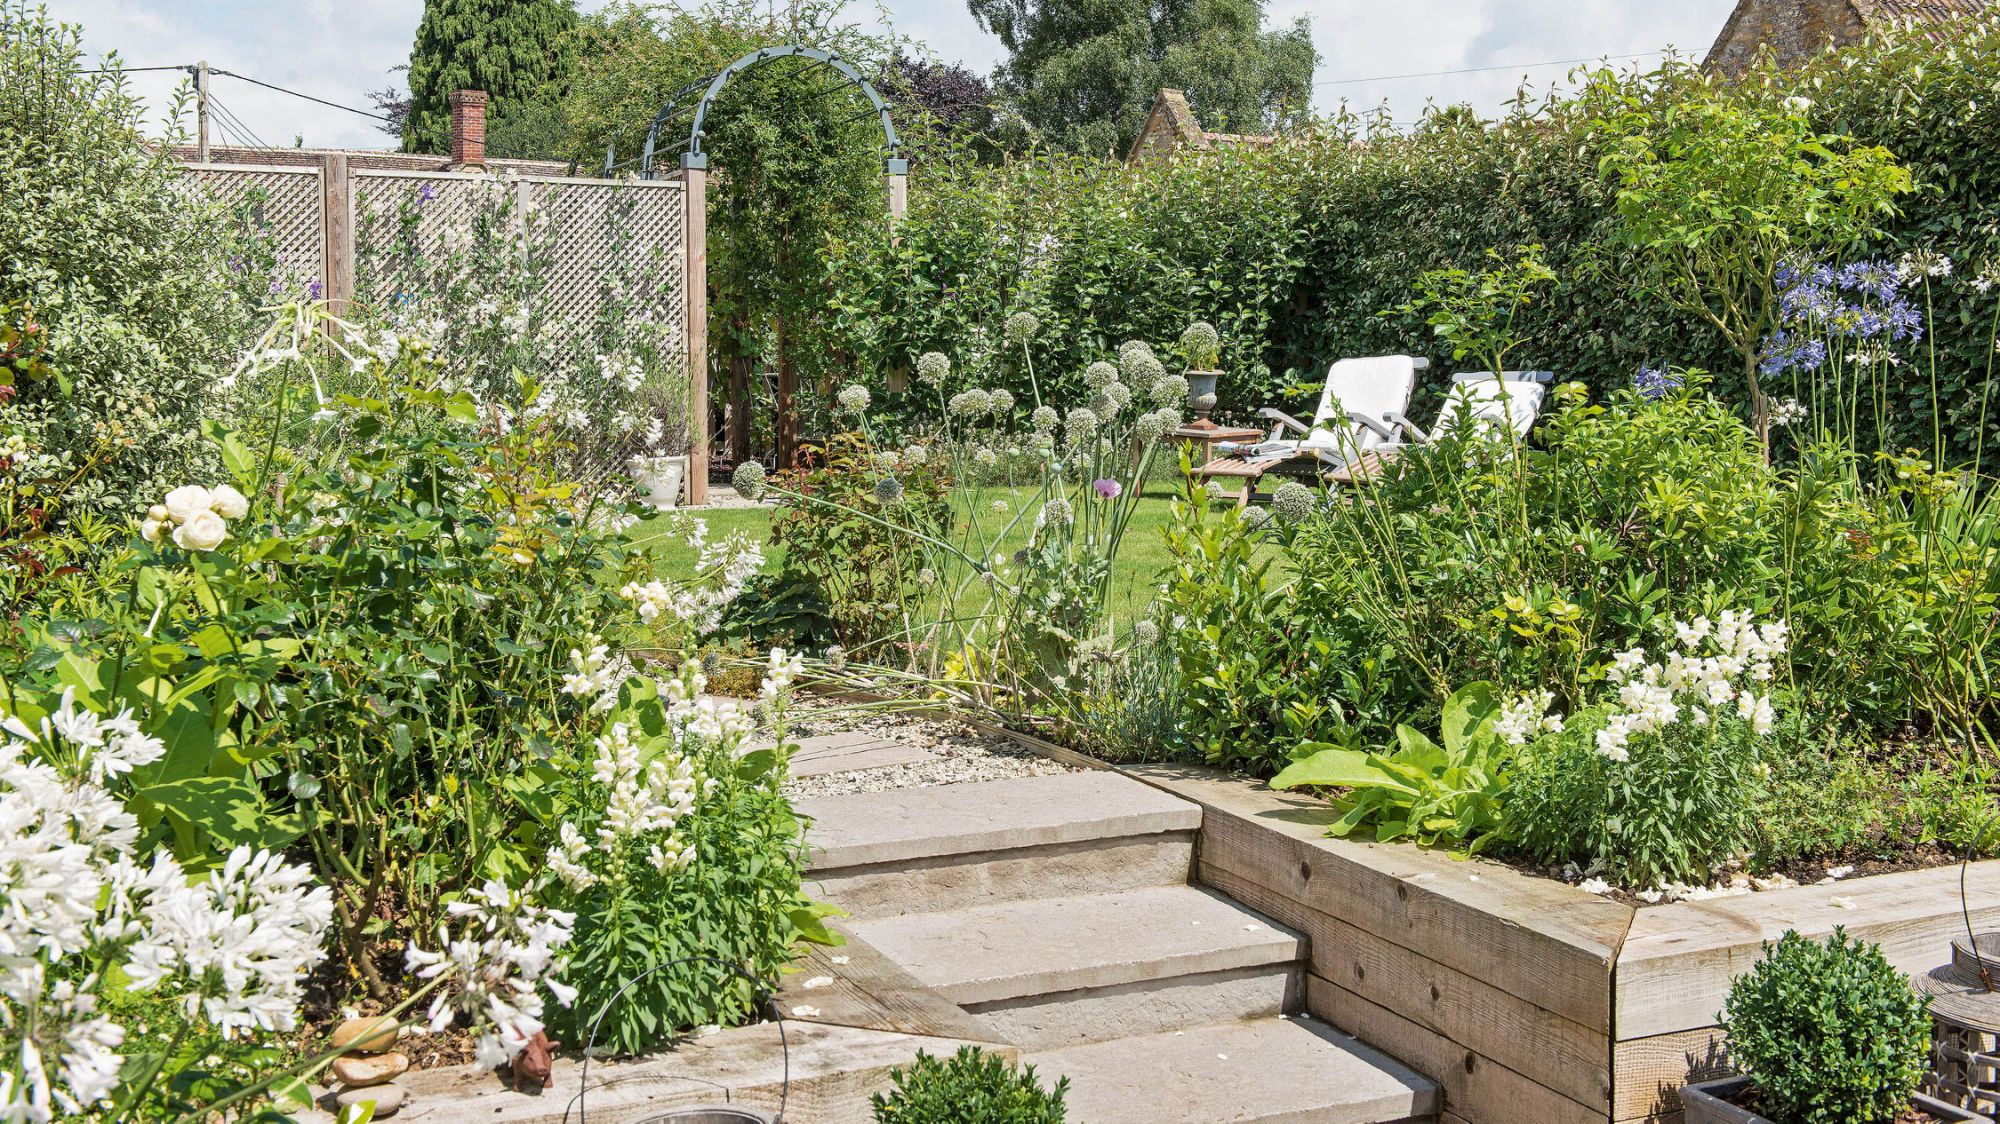 How much does landscaping cost? The price of redesigning a front or back garden plot